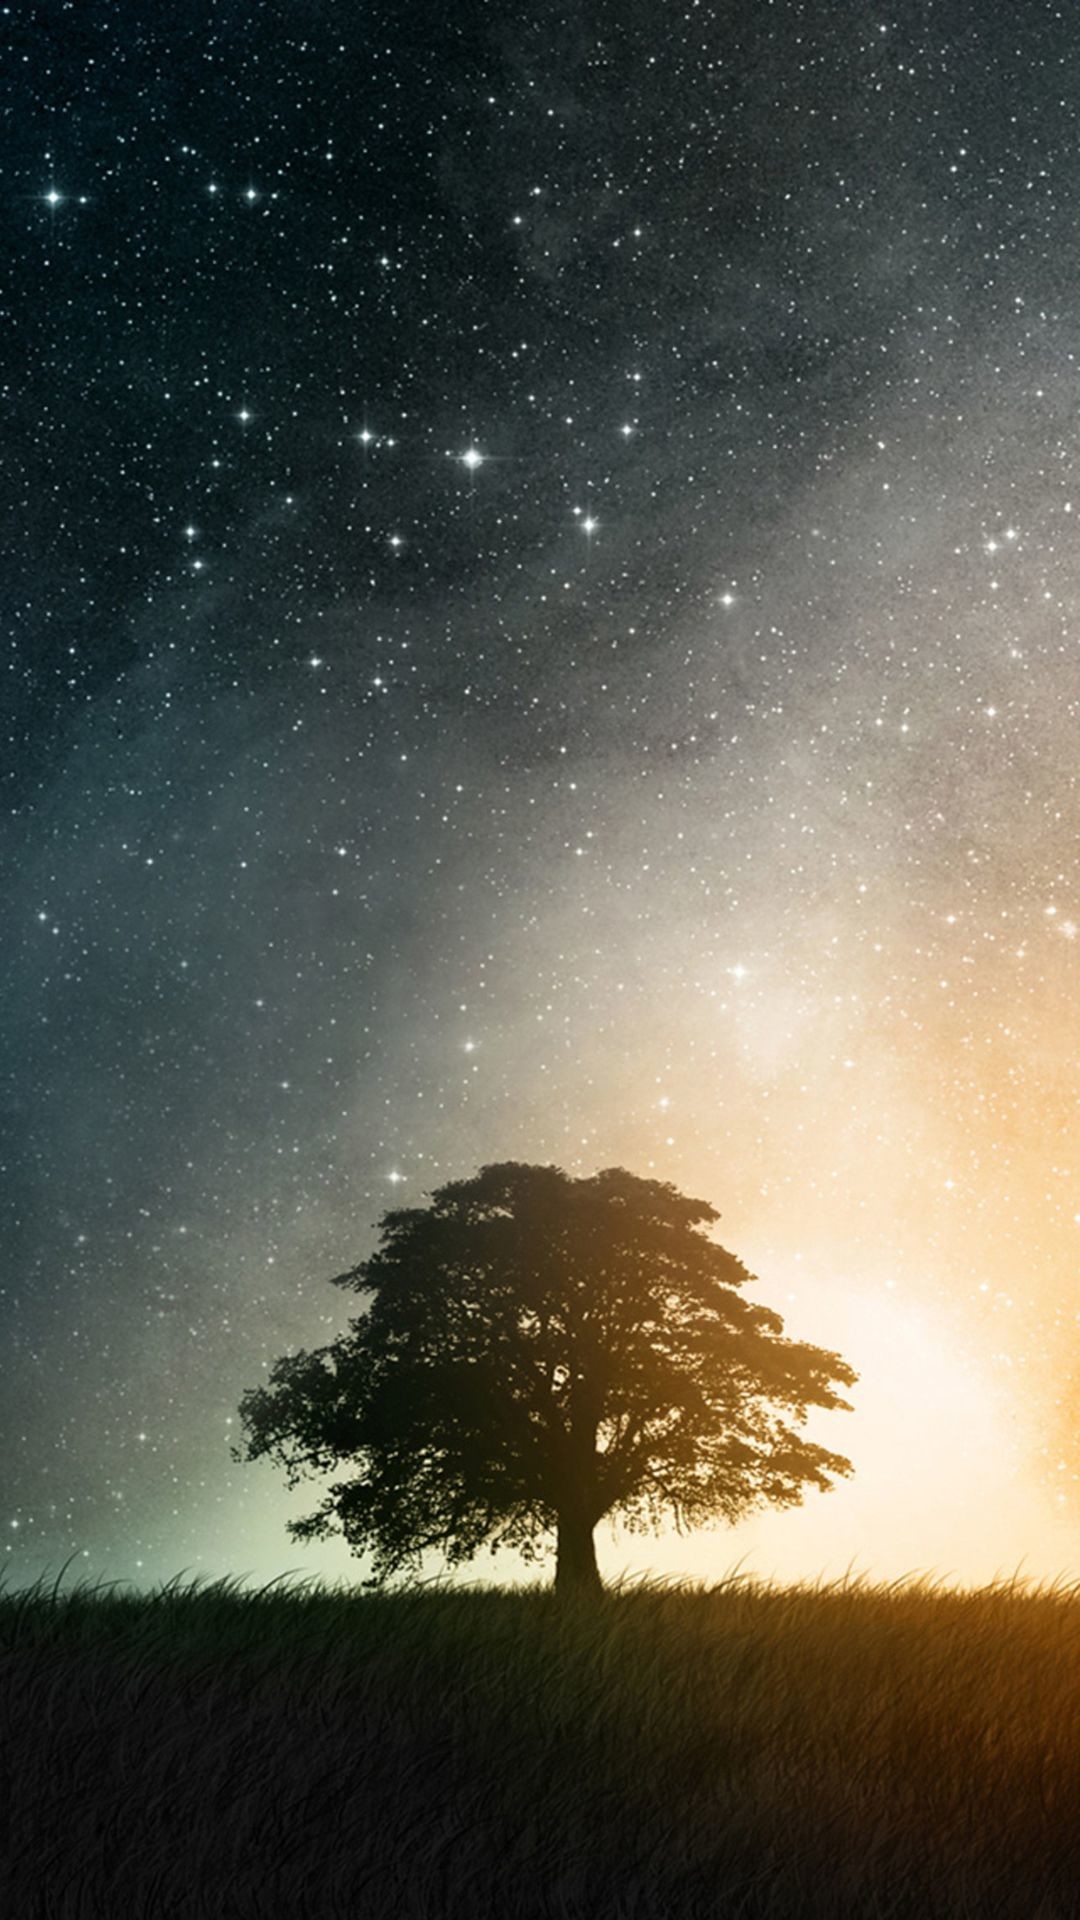 1080x1920 Night Hill Top Lonely Tree Vast Starry Skyscape iPhone 6 Wallpaper .